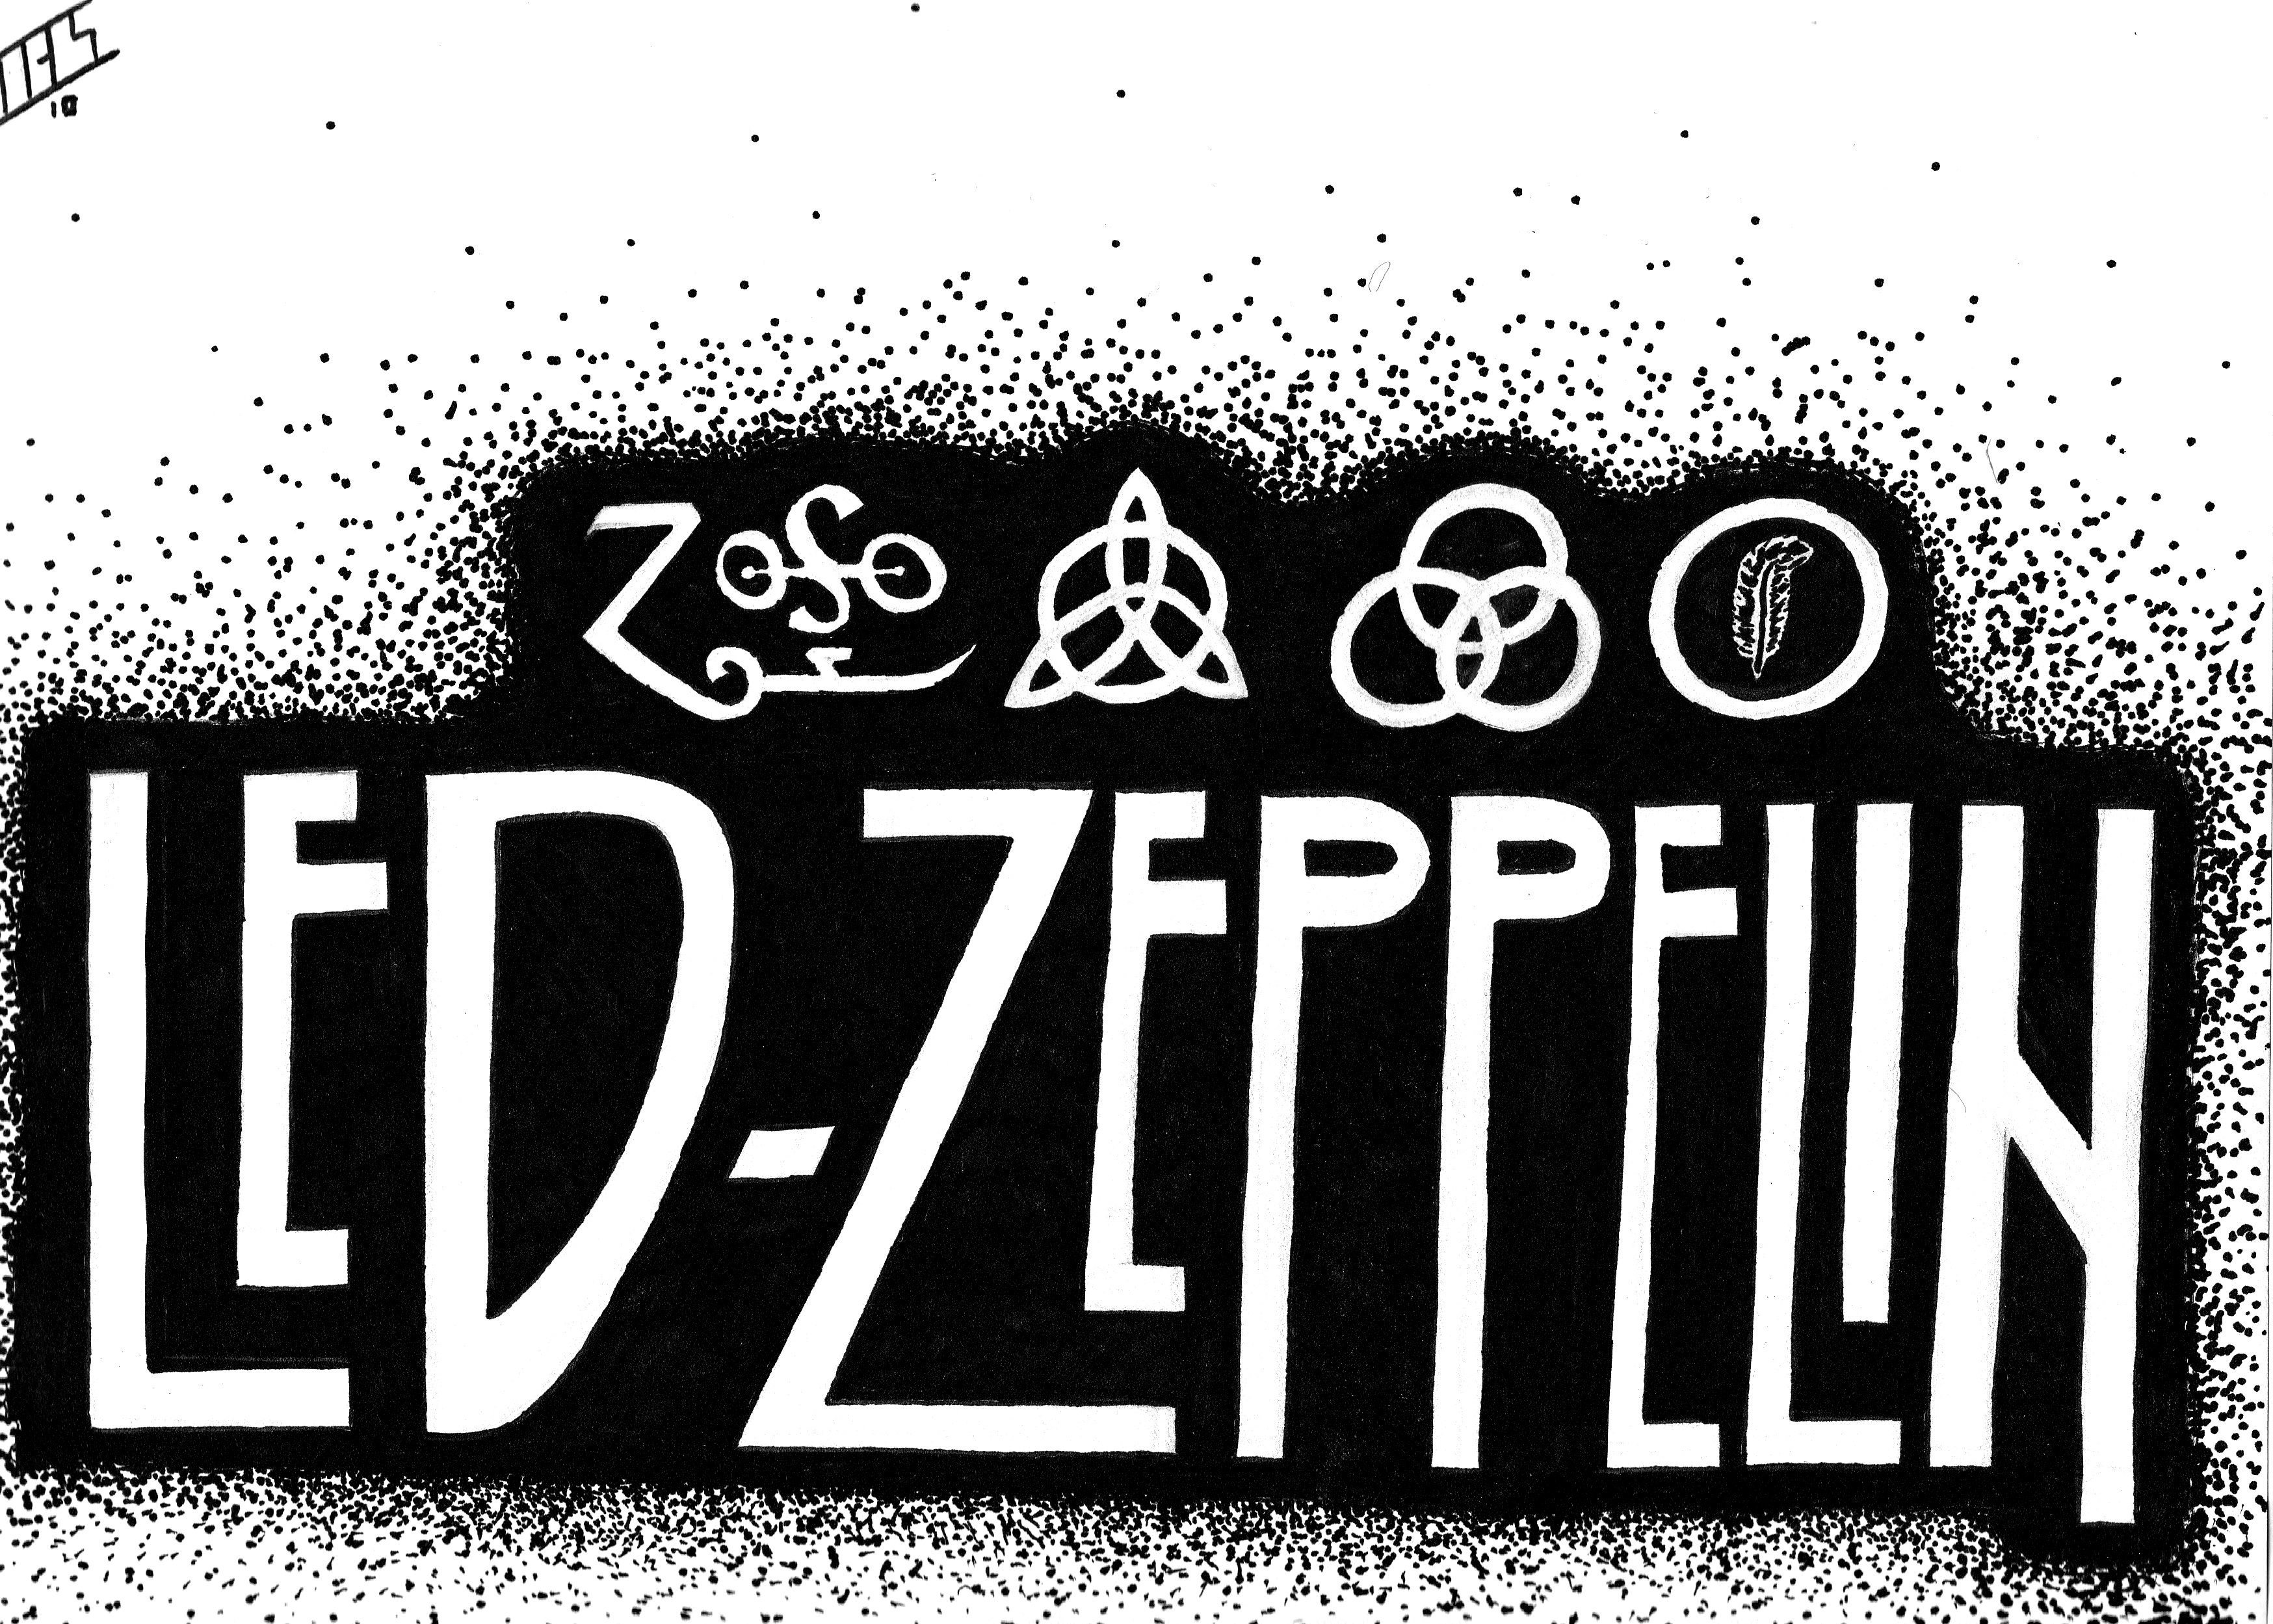 Download "Led Zeppelin" wallpapers mobile phone, free "Led Zeppelin" HD pictures